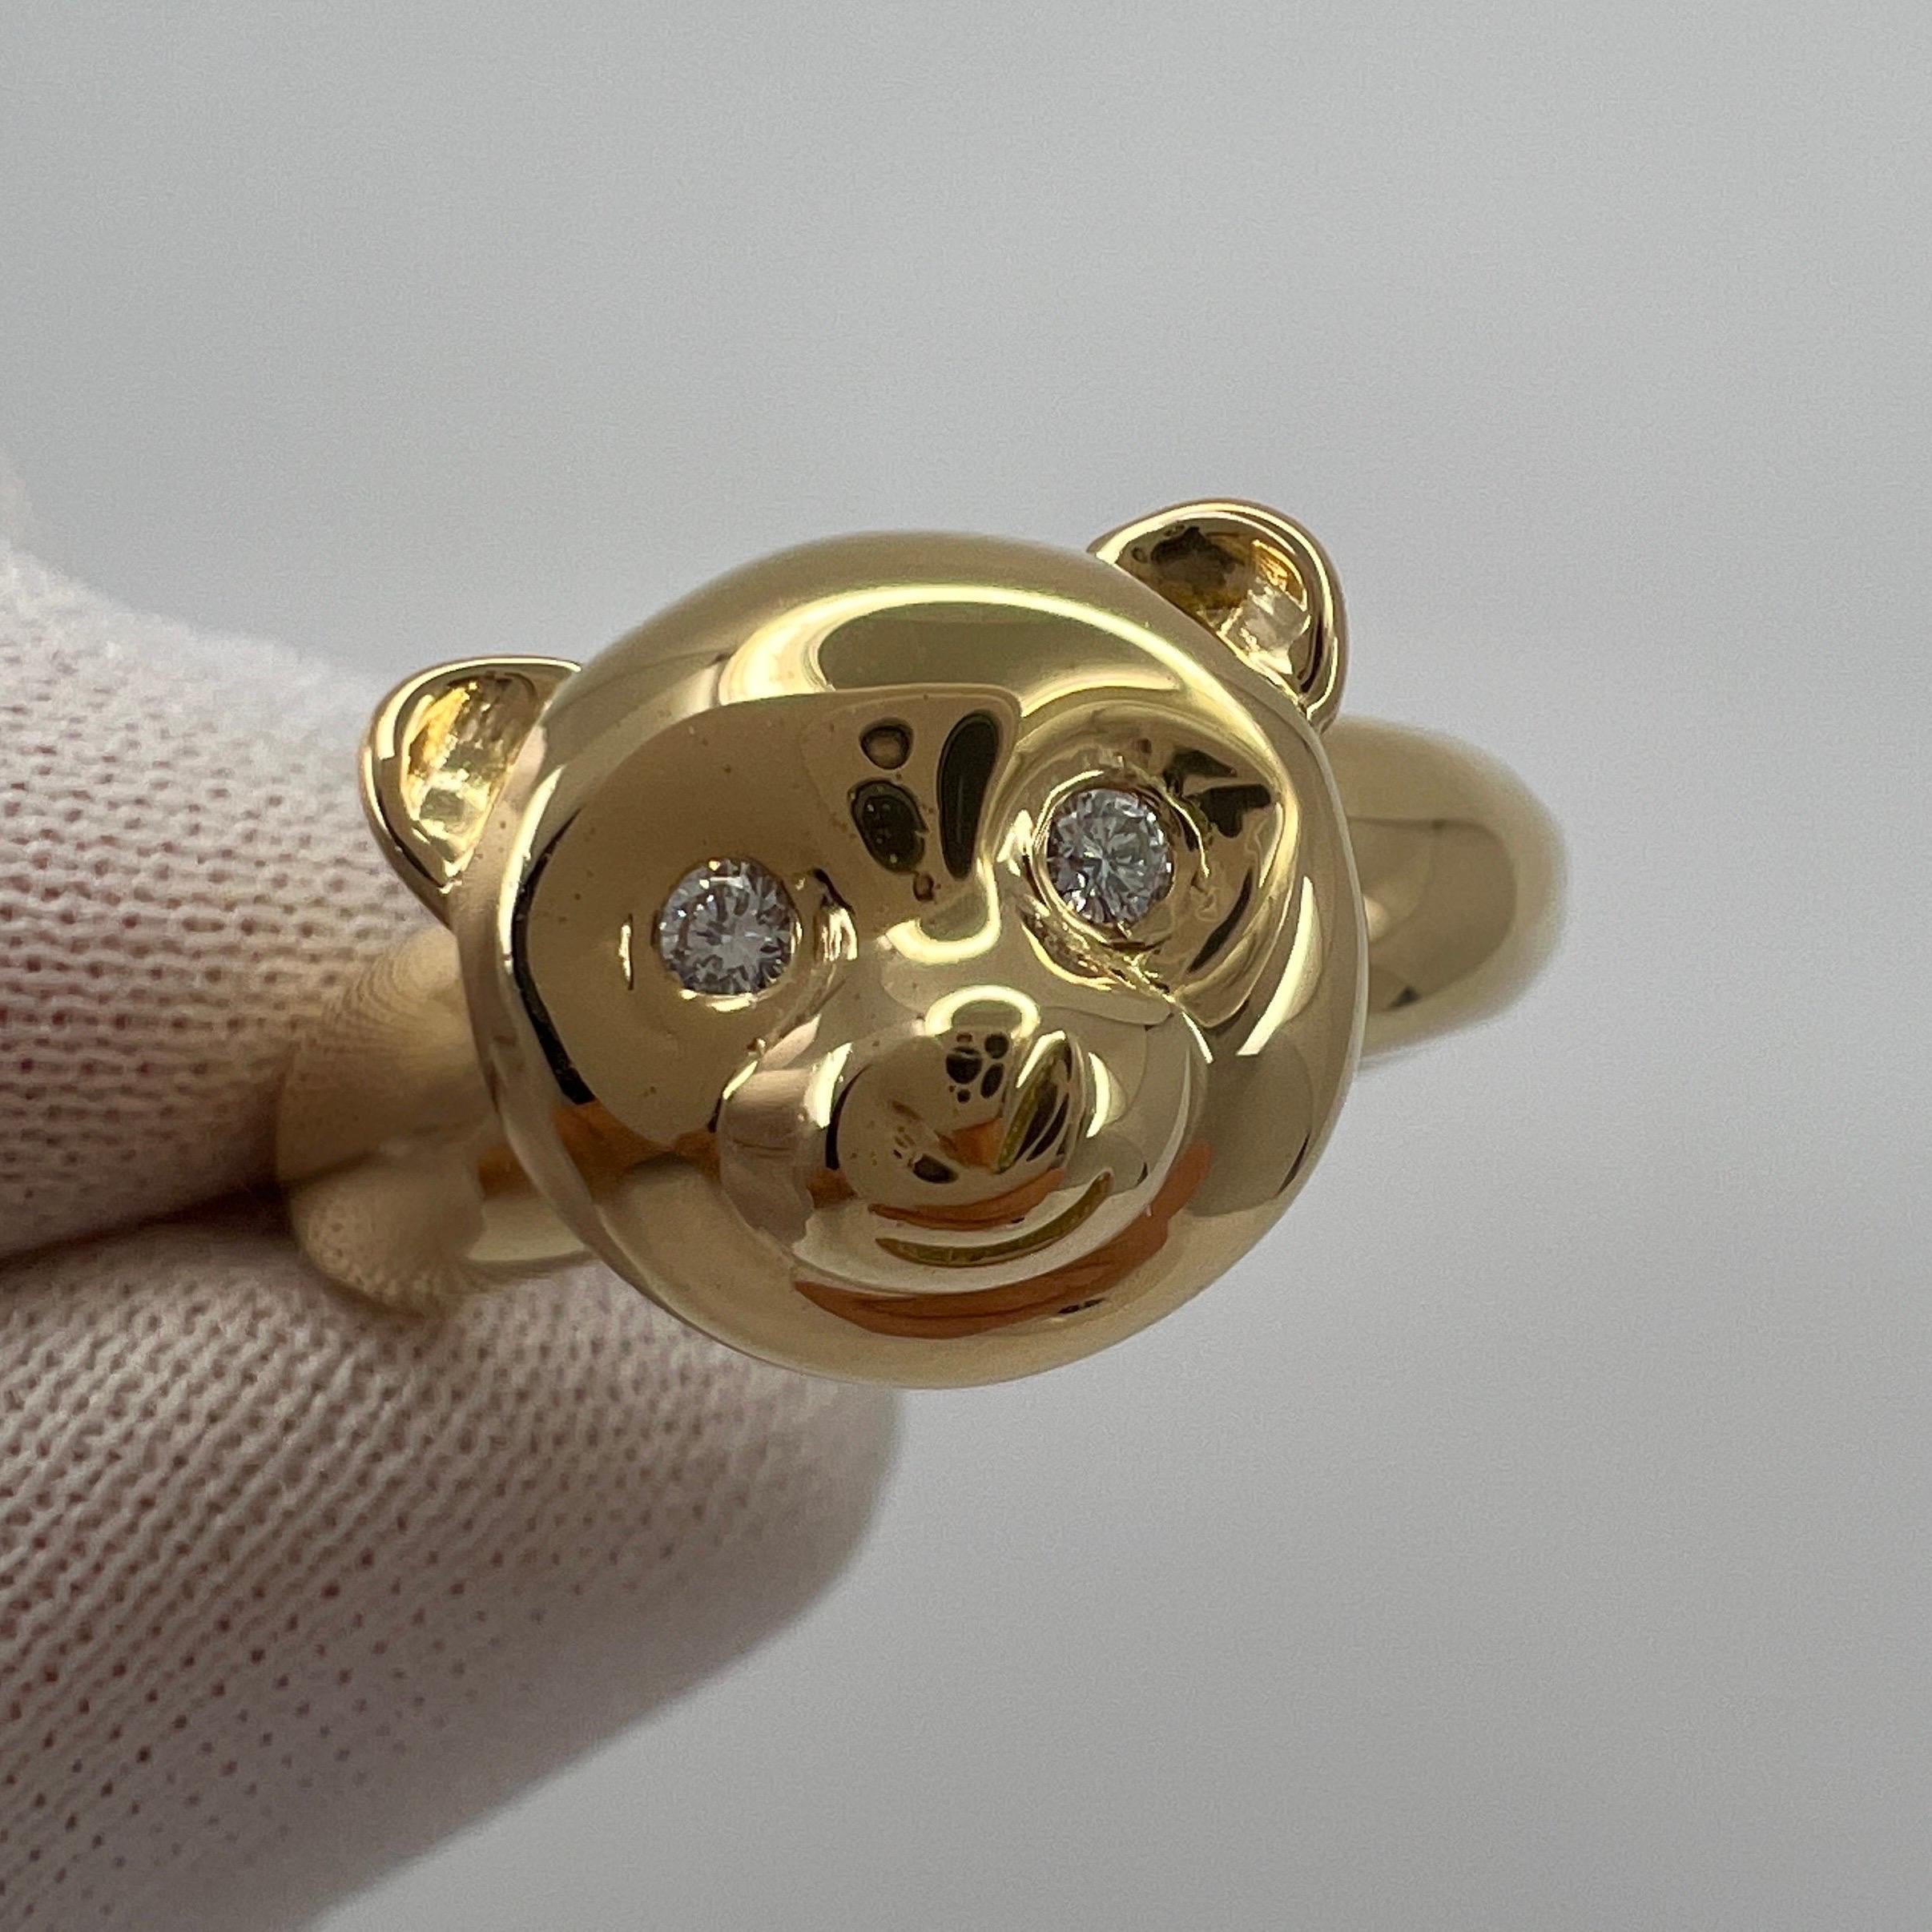 Very Rare Vintage Van Cleef & Arpels 18k Yellow Gold Teddy Bear Ring AND Pendant.

A unique and incredibly rare piece by Van Cleef & Arpels. 

This beautifully made teddy bear ring features an exquisitely crafted hinge allowing the head to turn with